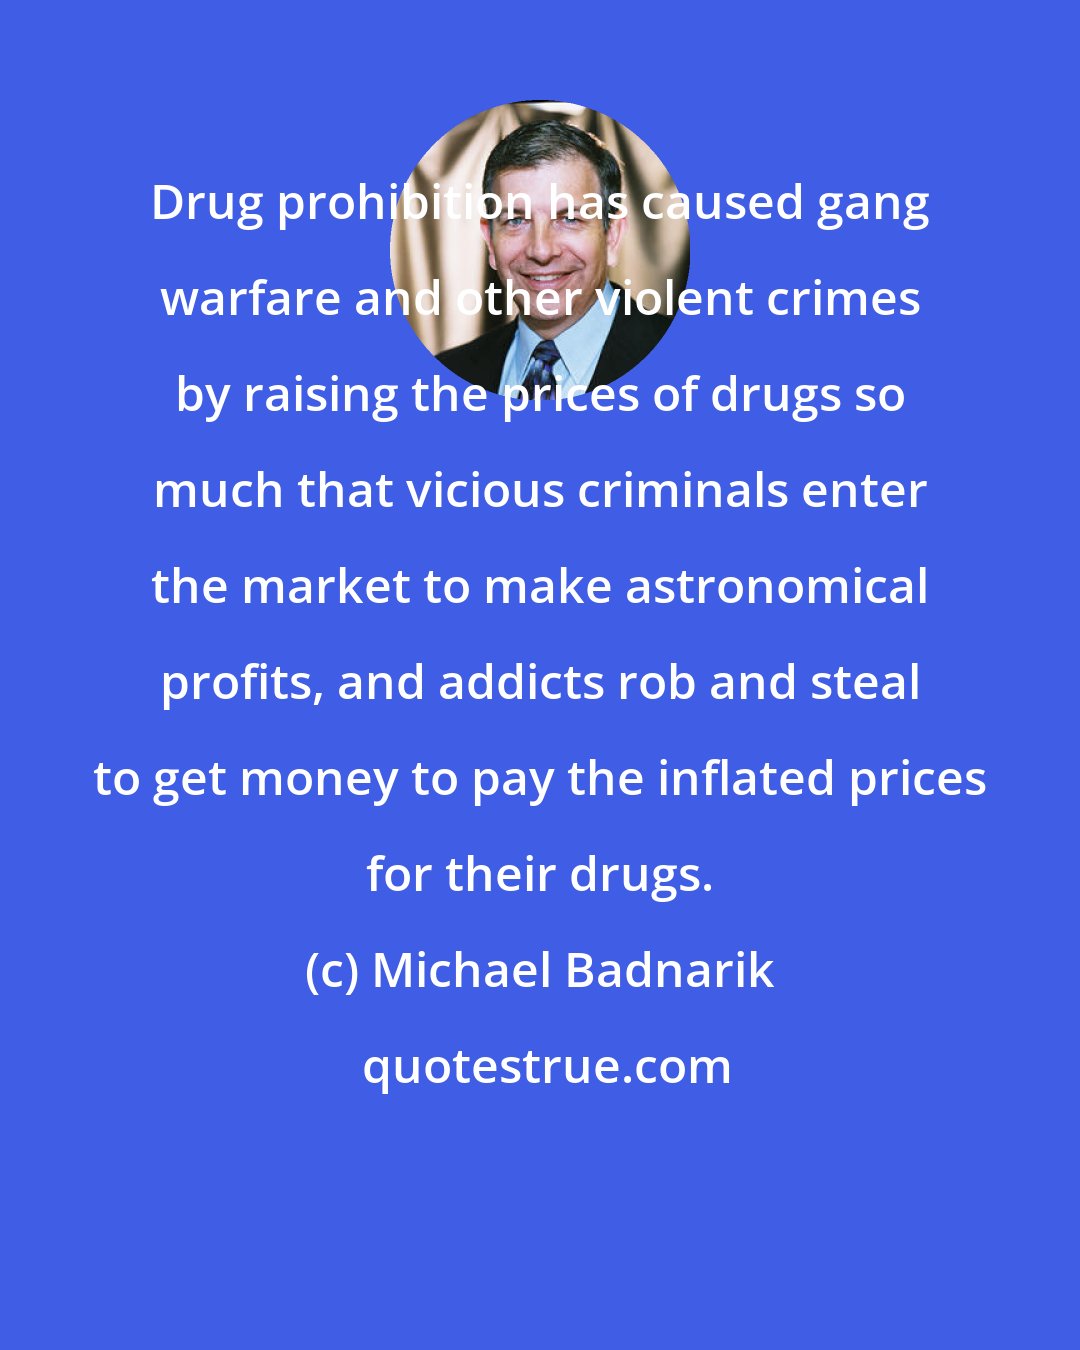 Michael Badnarik: Drug prohibition has caused gang warfare and other violent crimes by raising the prices of drugs so much that vicious criminals enter the market to make astronomical profits, and addicts rob and steal to get money to pay the inflated prices for their drugs.